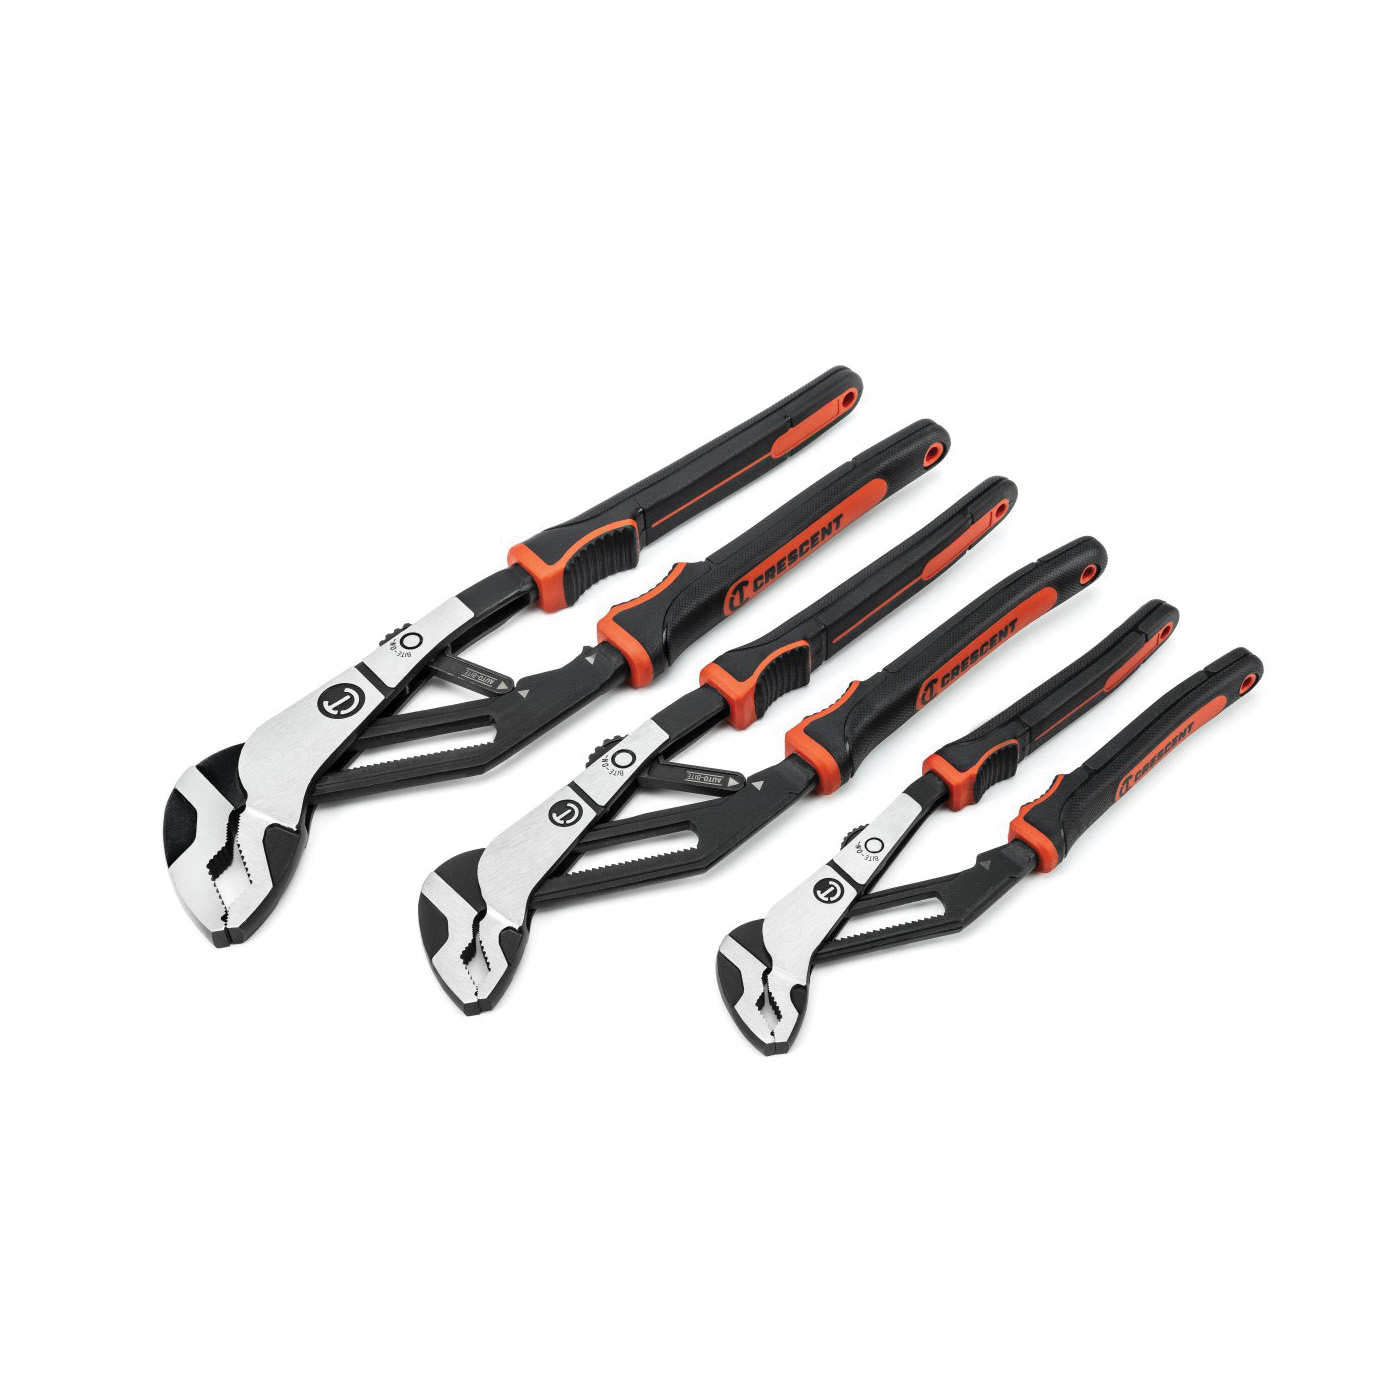 Z2 Auto-Bite Series RTABCGSET3 Tongue and Groove Plier Set, 3-Piece, Alloy Steel, Black/Rawhide, Polished